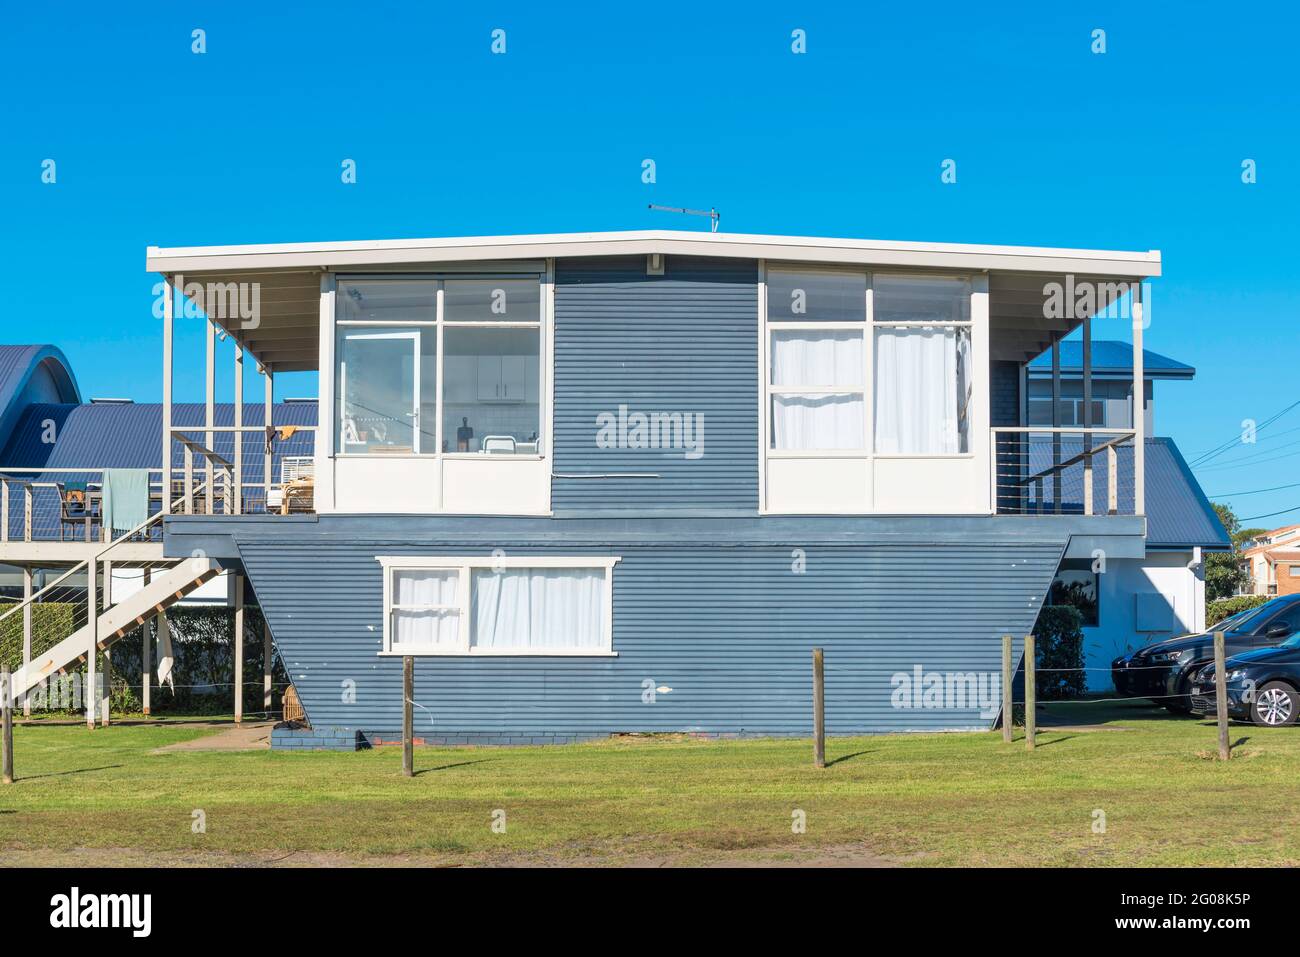 A 1960 constructed, 3 bedroom, mid century modern home in the town of Culburra Beach (south) on the New South Wales south coast of Australia Stock Photo